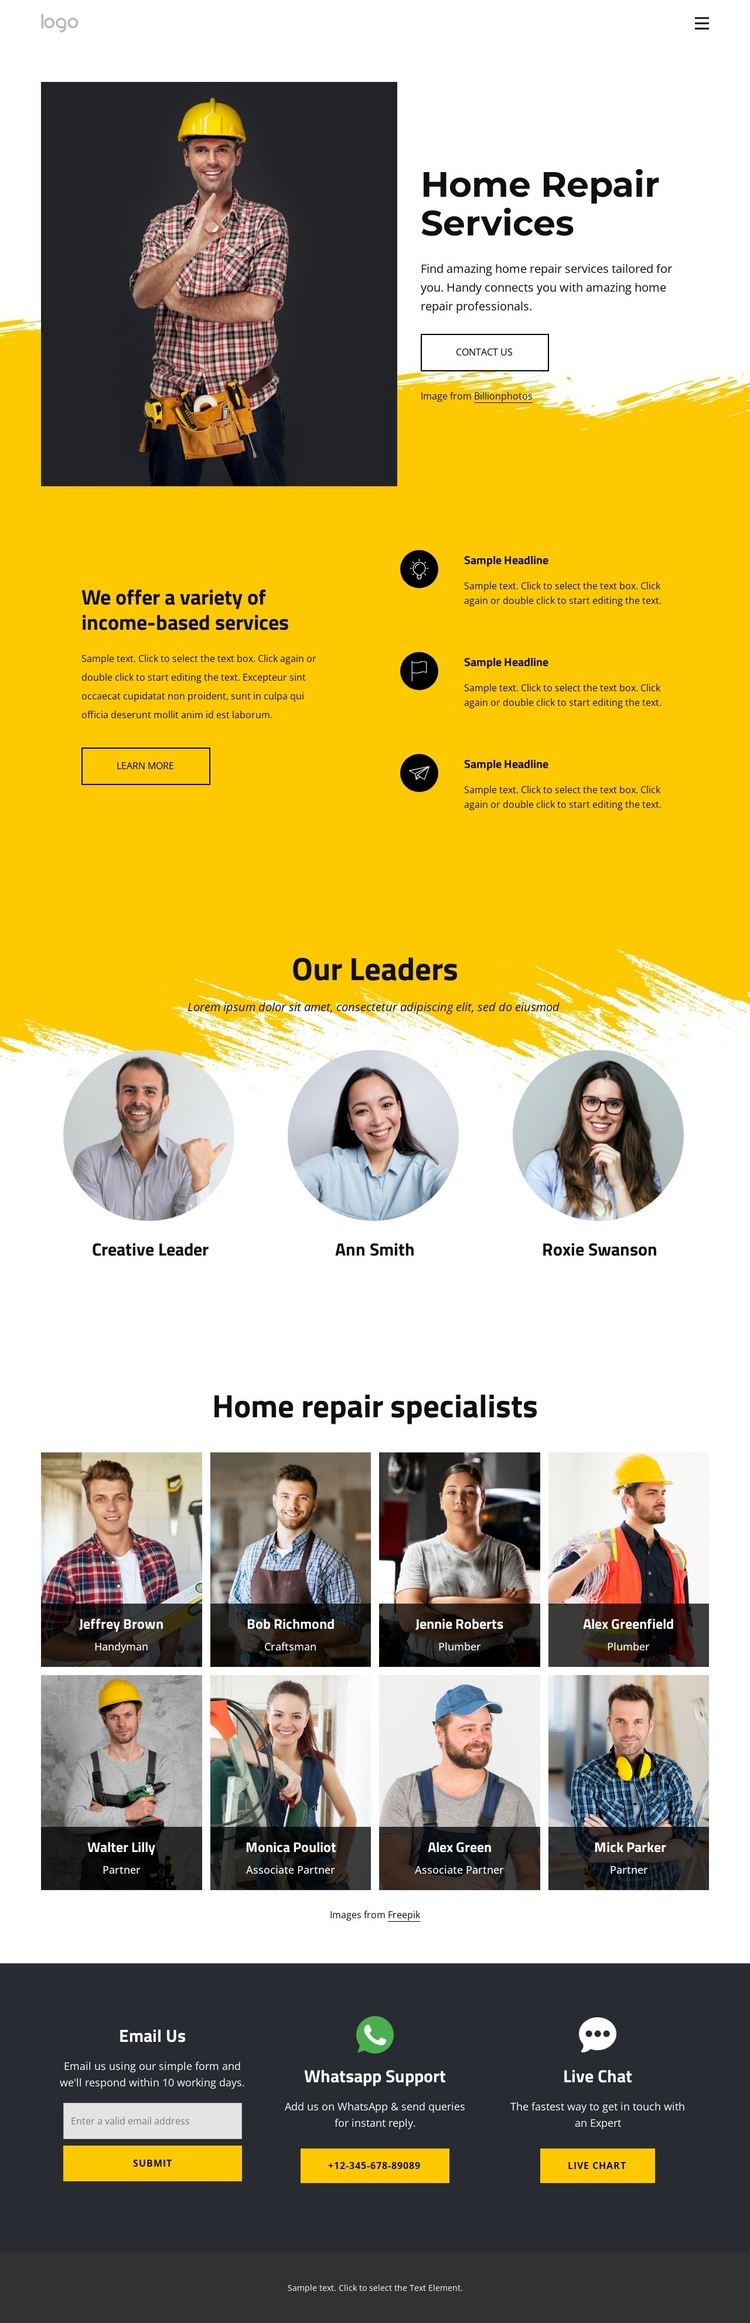 Find home repair services today Wysiwyg Editor Html 